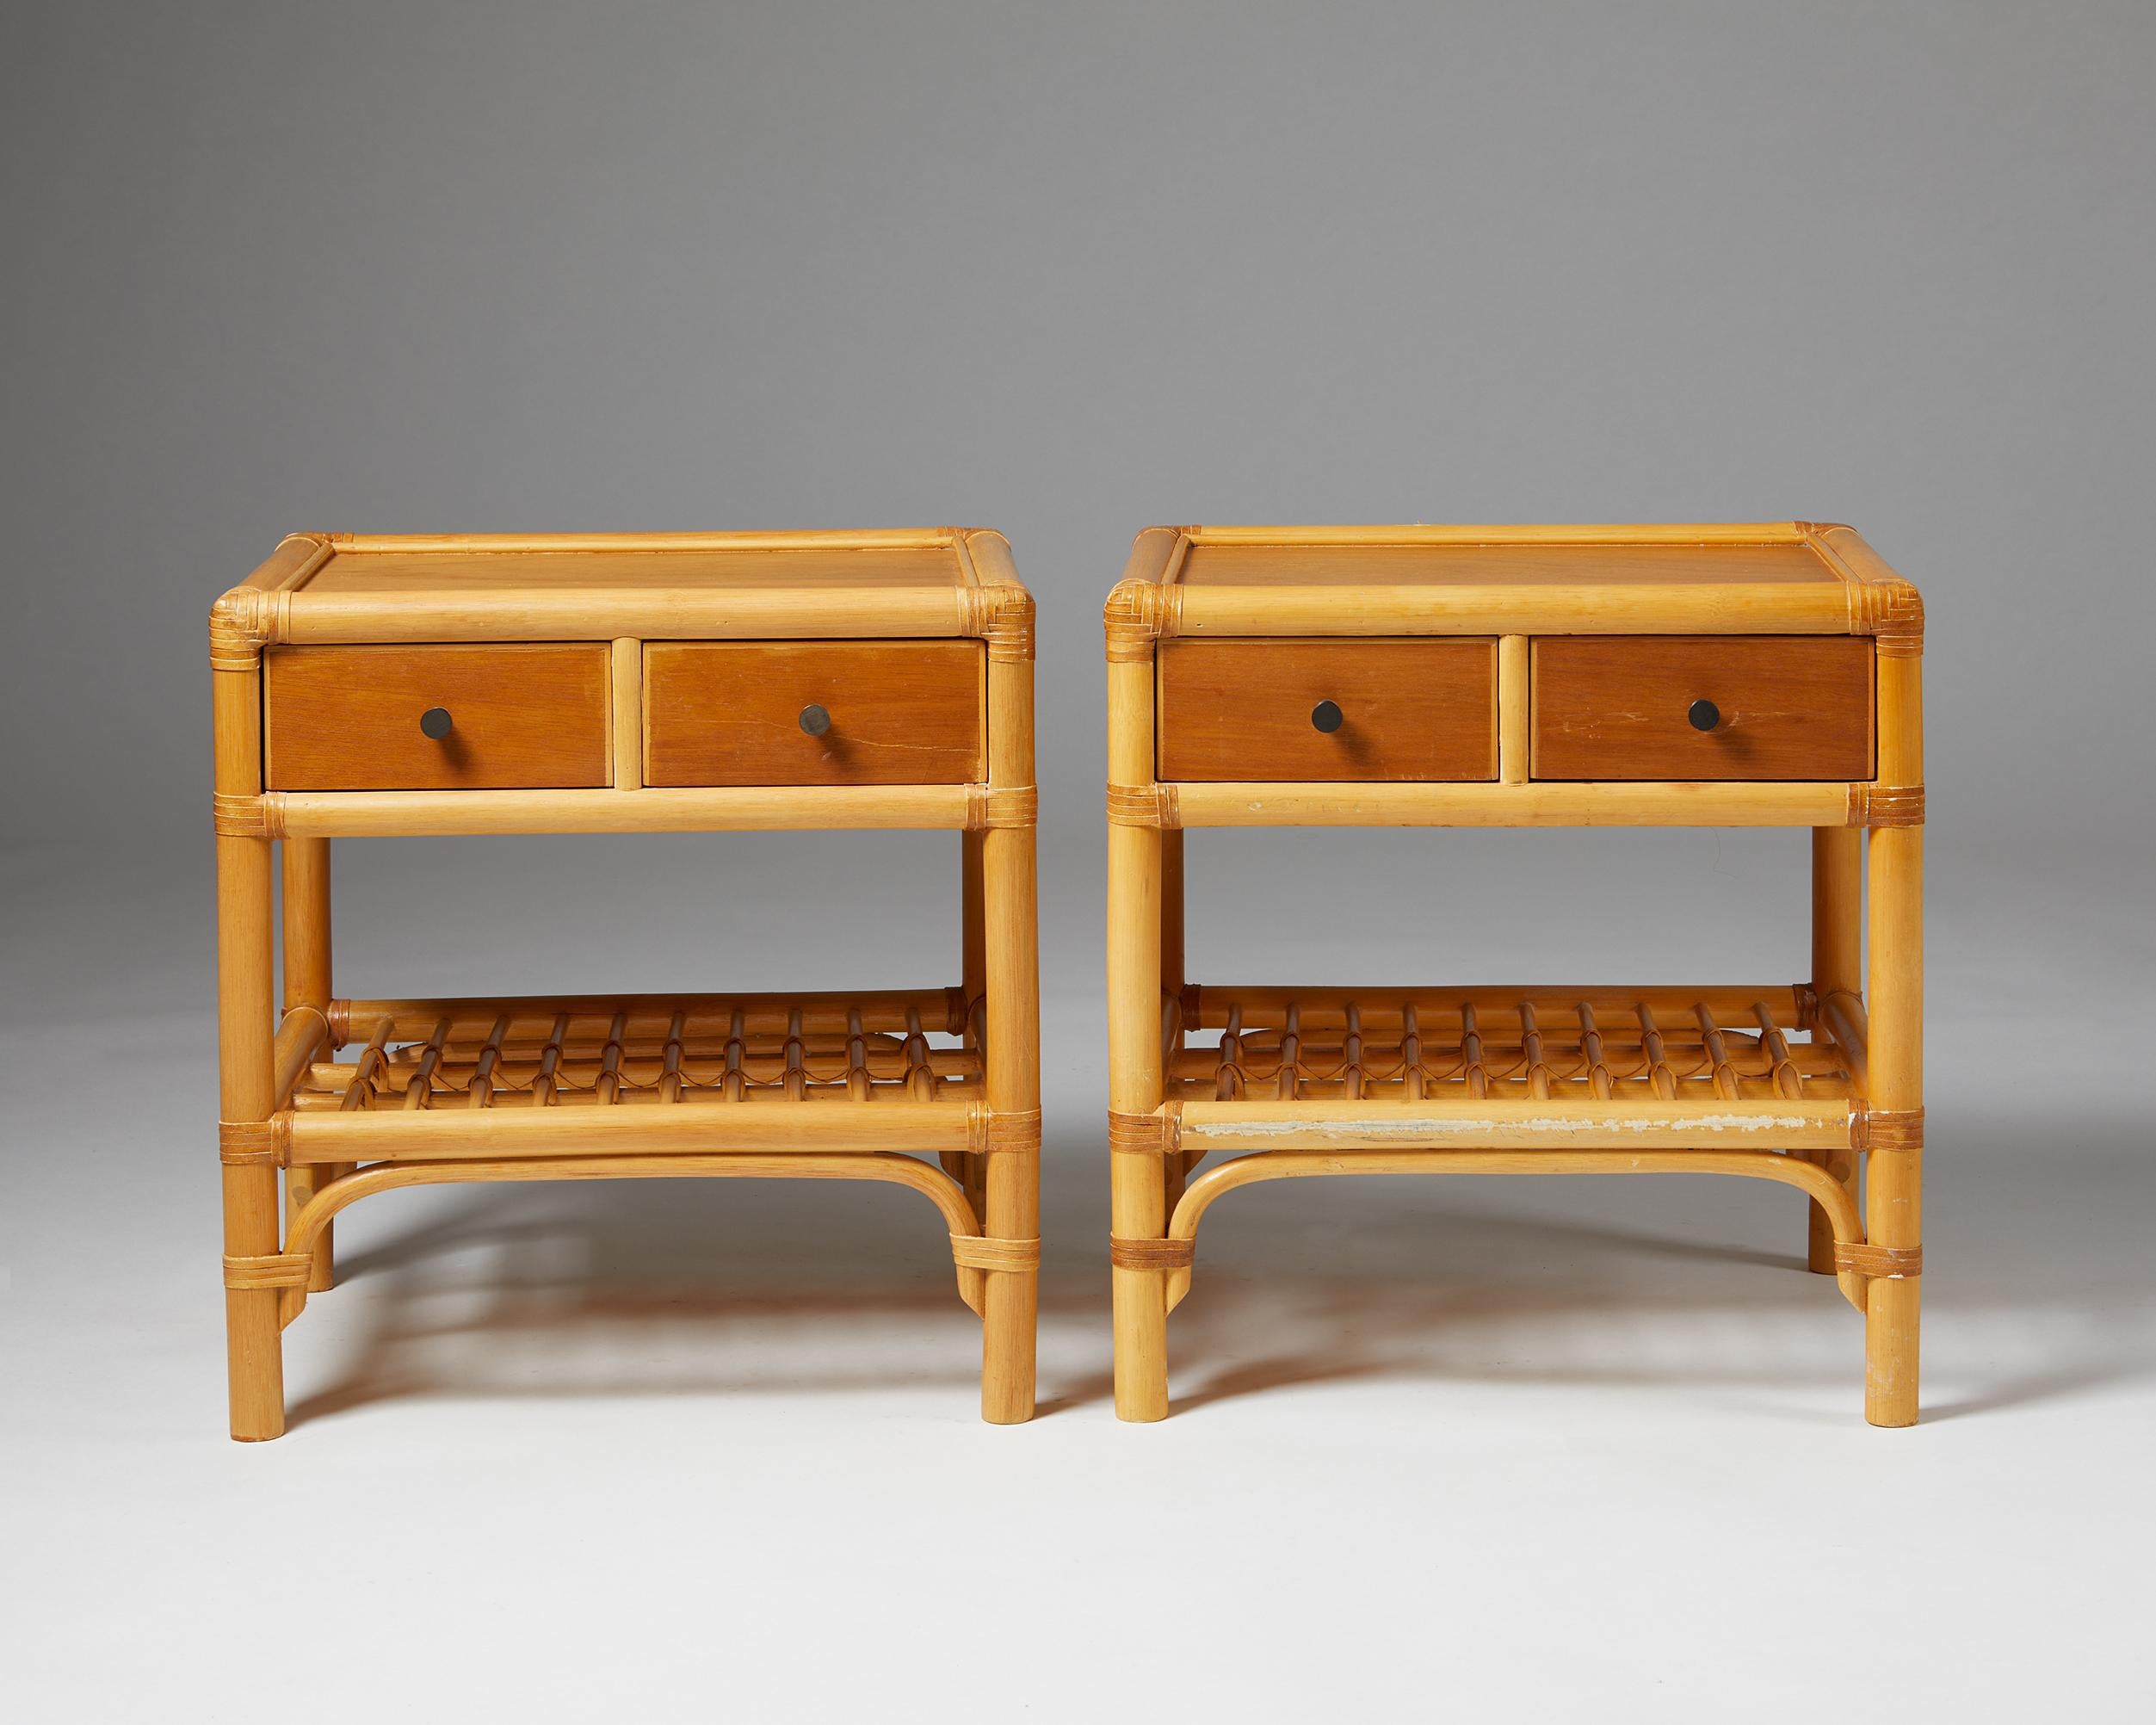 Swedish Pair of Bedside Tables, Anonymous for DUX, Sweden, 1960s For Sale